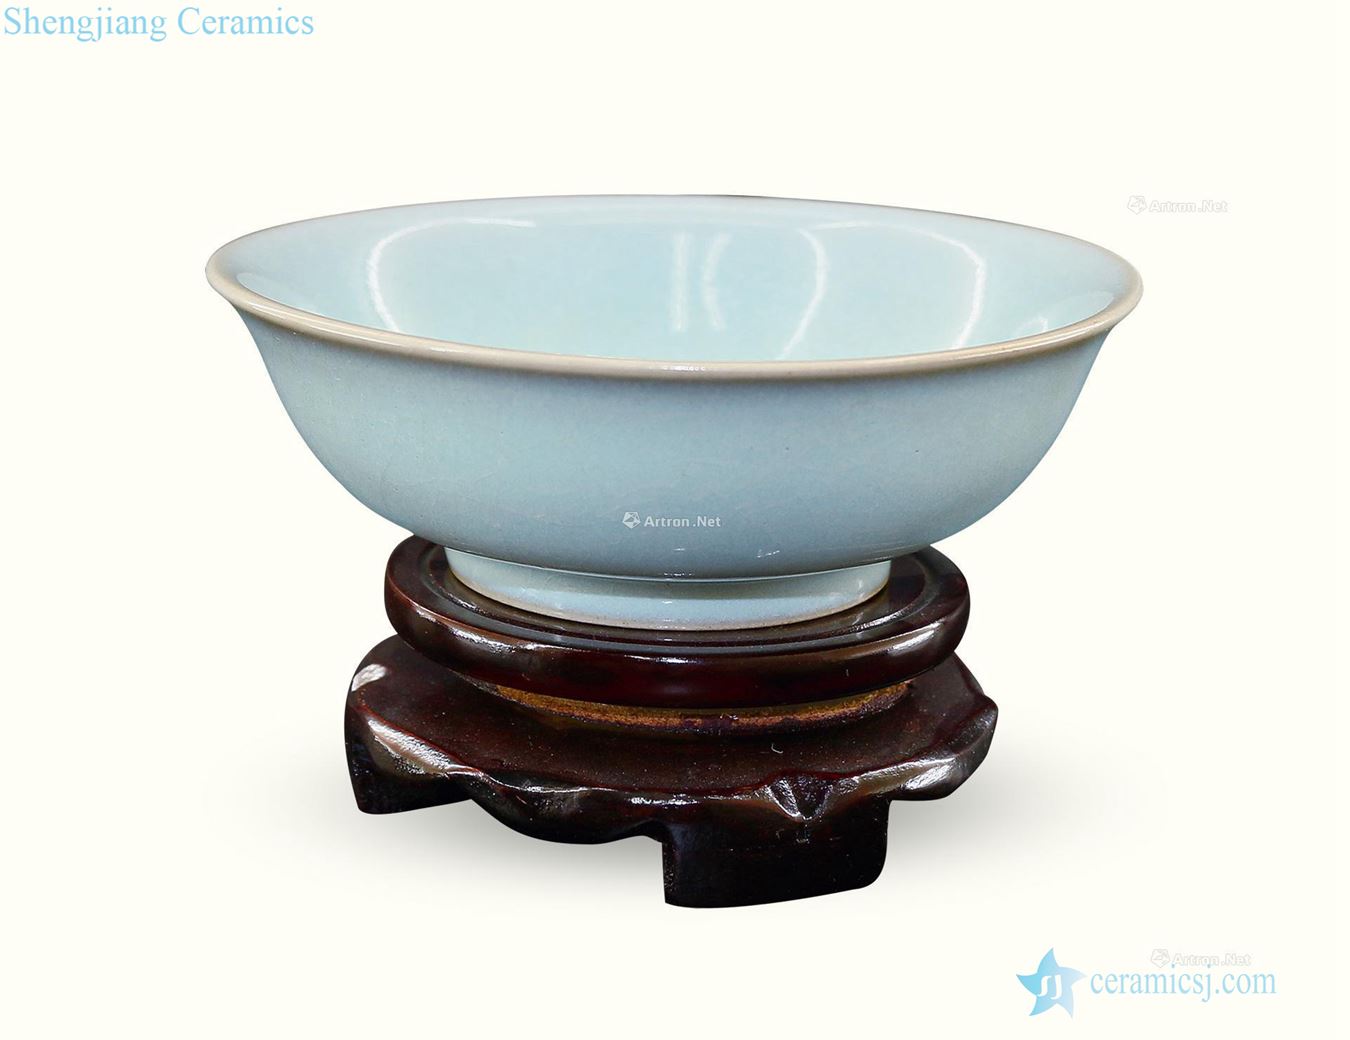 The song dynasty Your kiln azure glaze bowls